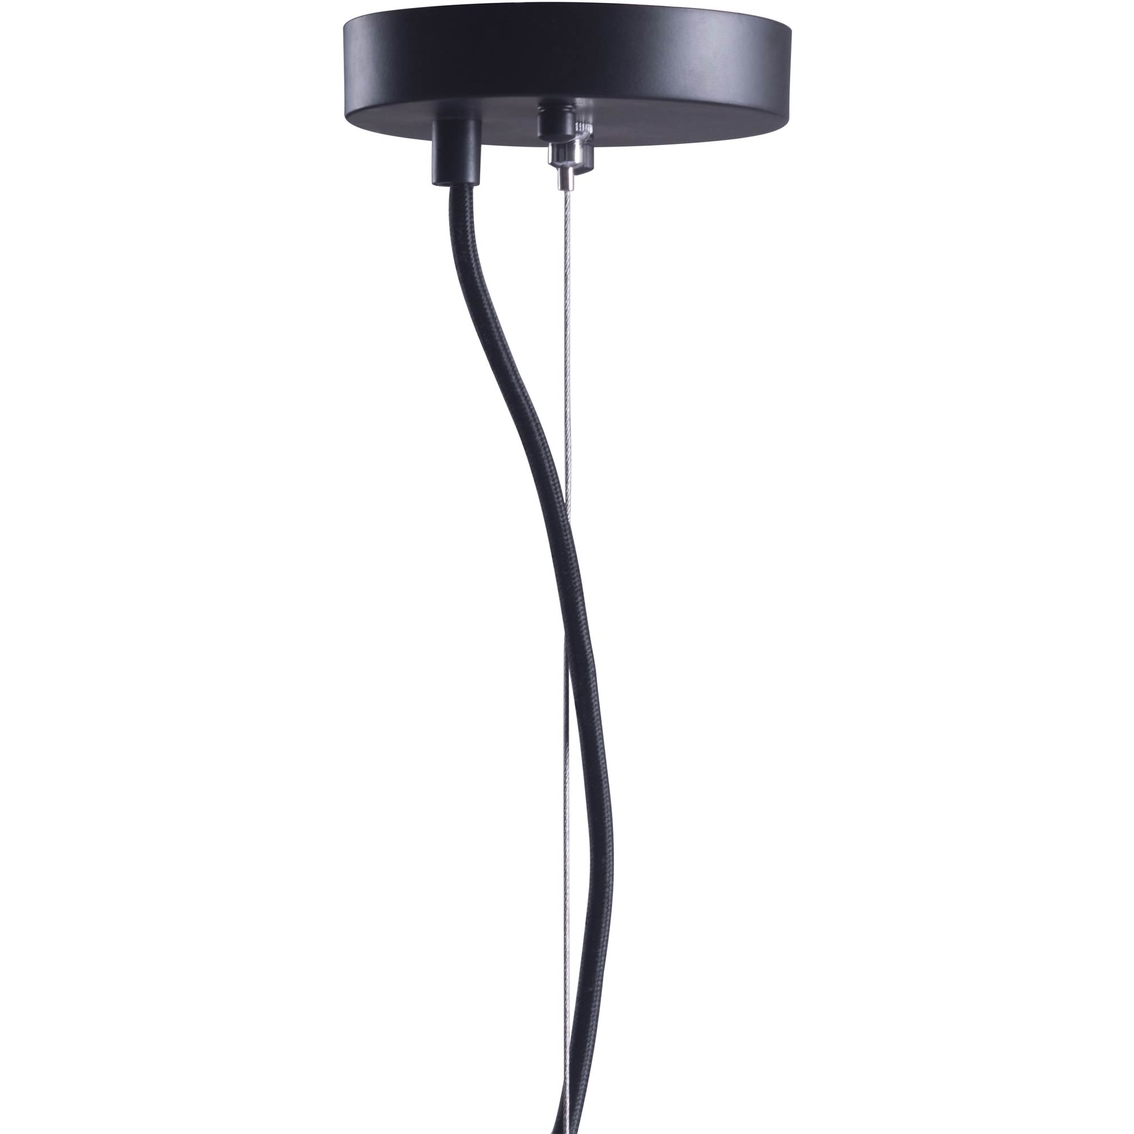 Zuo Modern Fortune Ceiling Lamp - Image 2 of 3